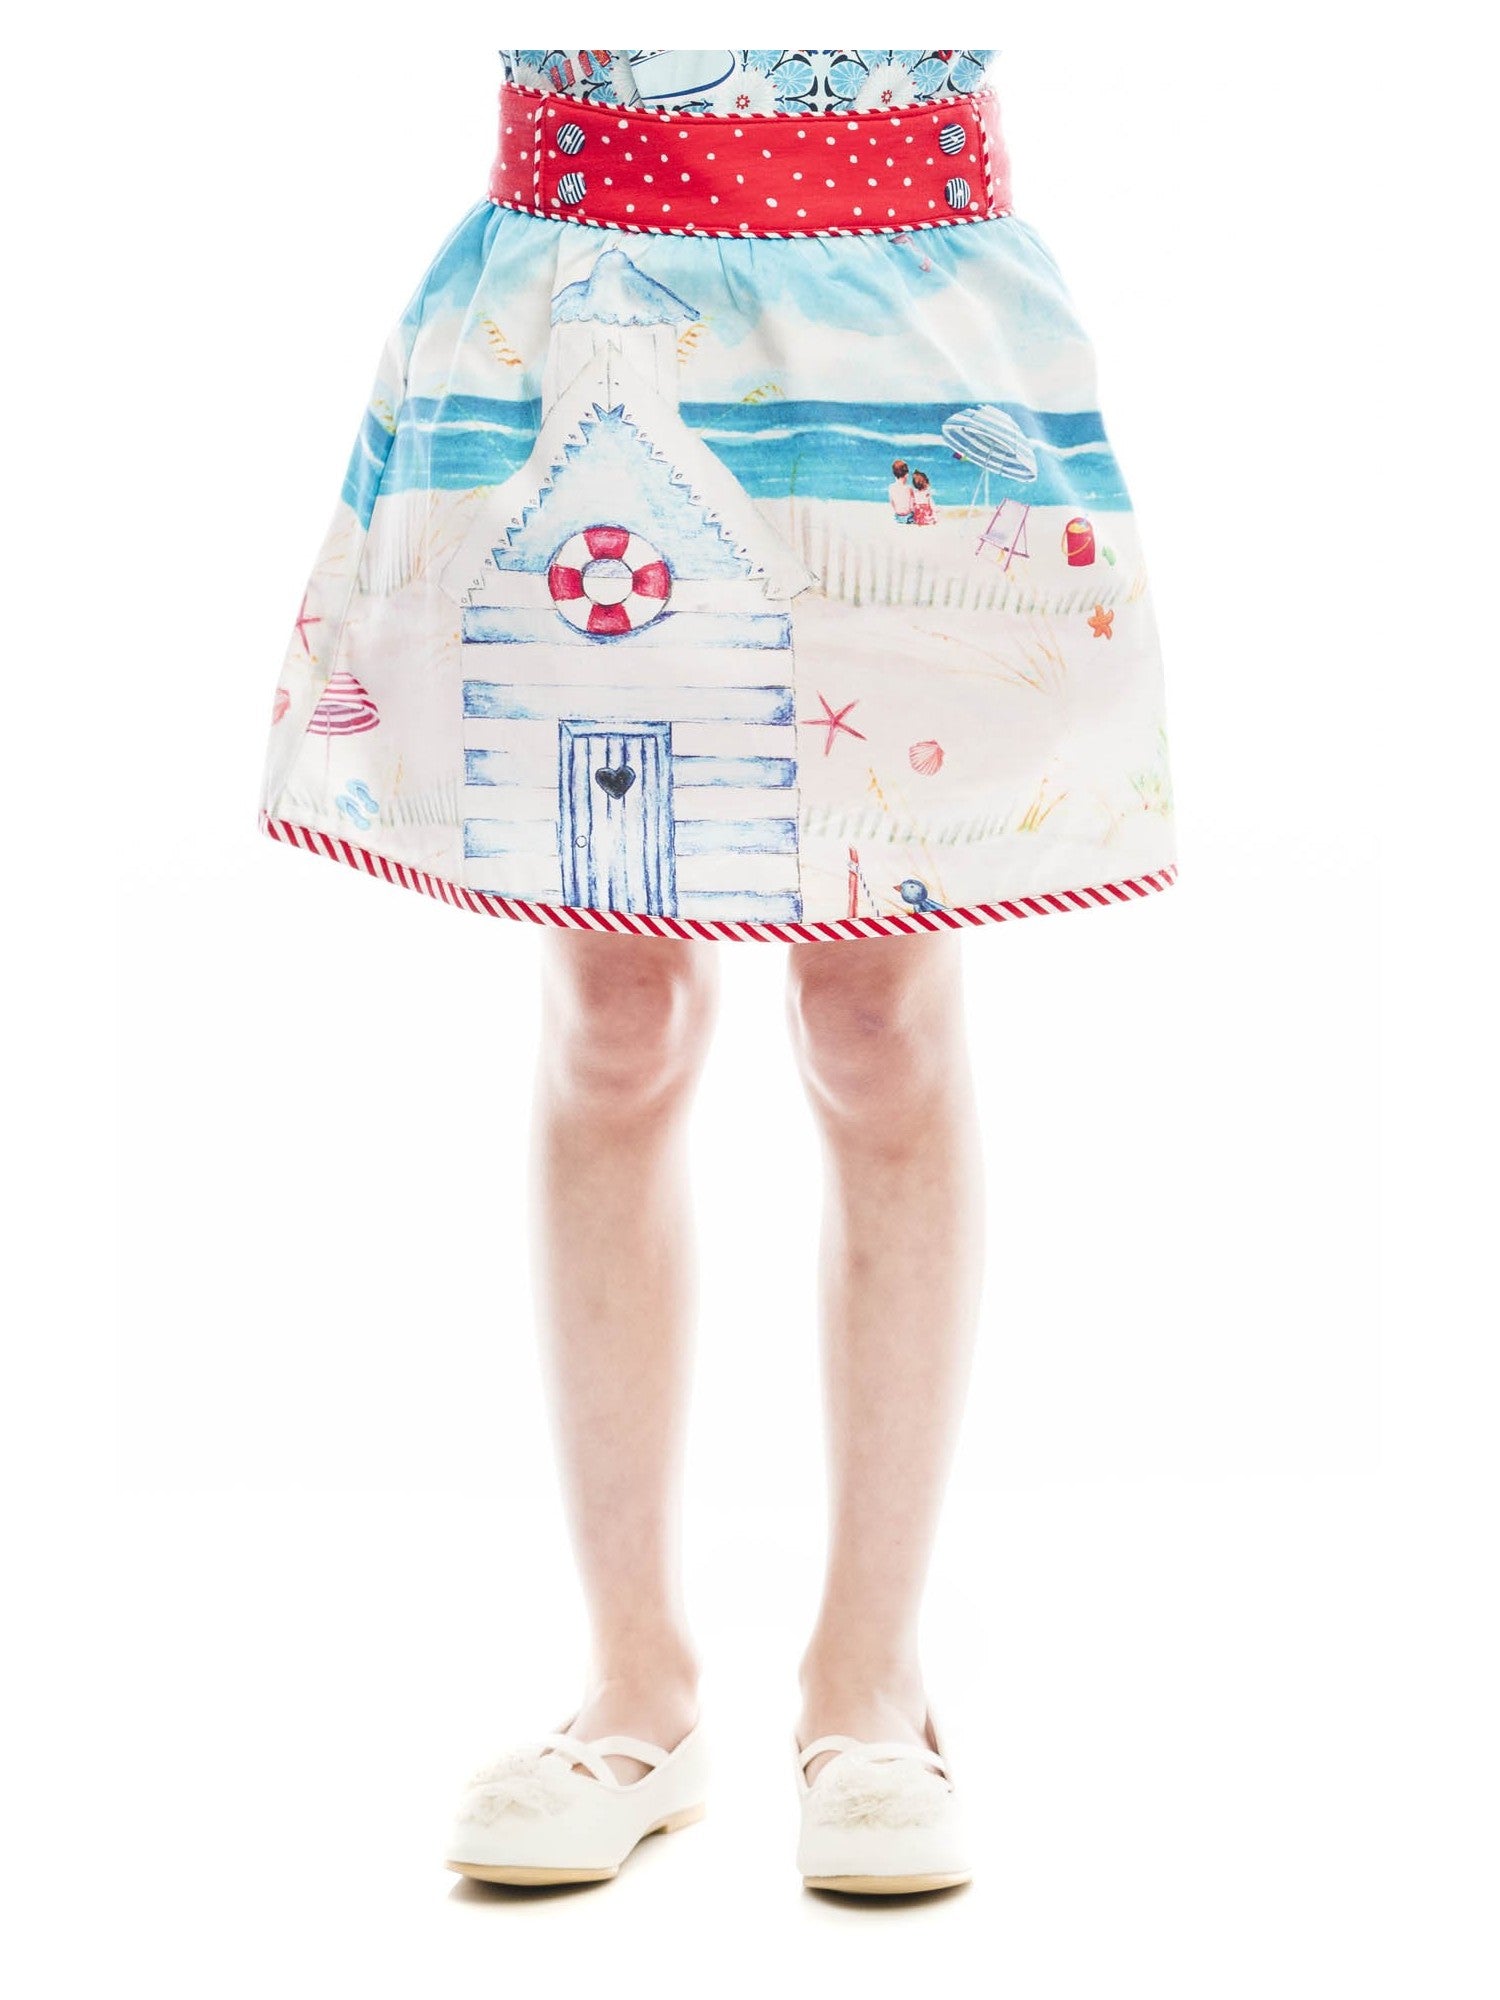 
  Skirt from the Rosalita Senoritas girl's clothing line, with polka dot band in
  life and chee...